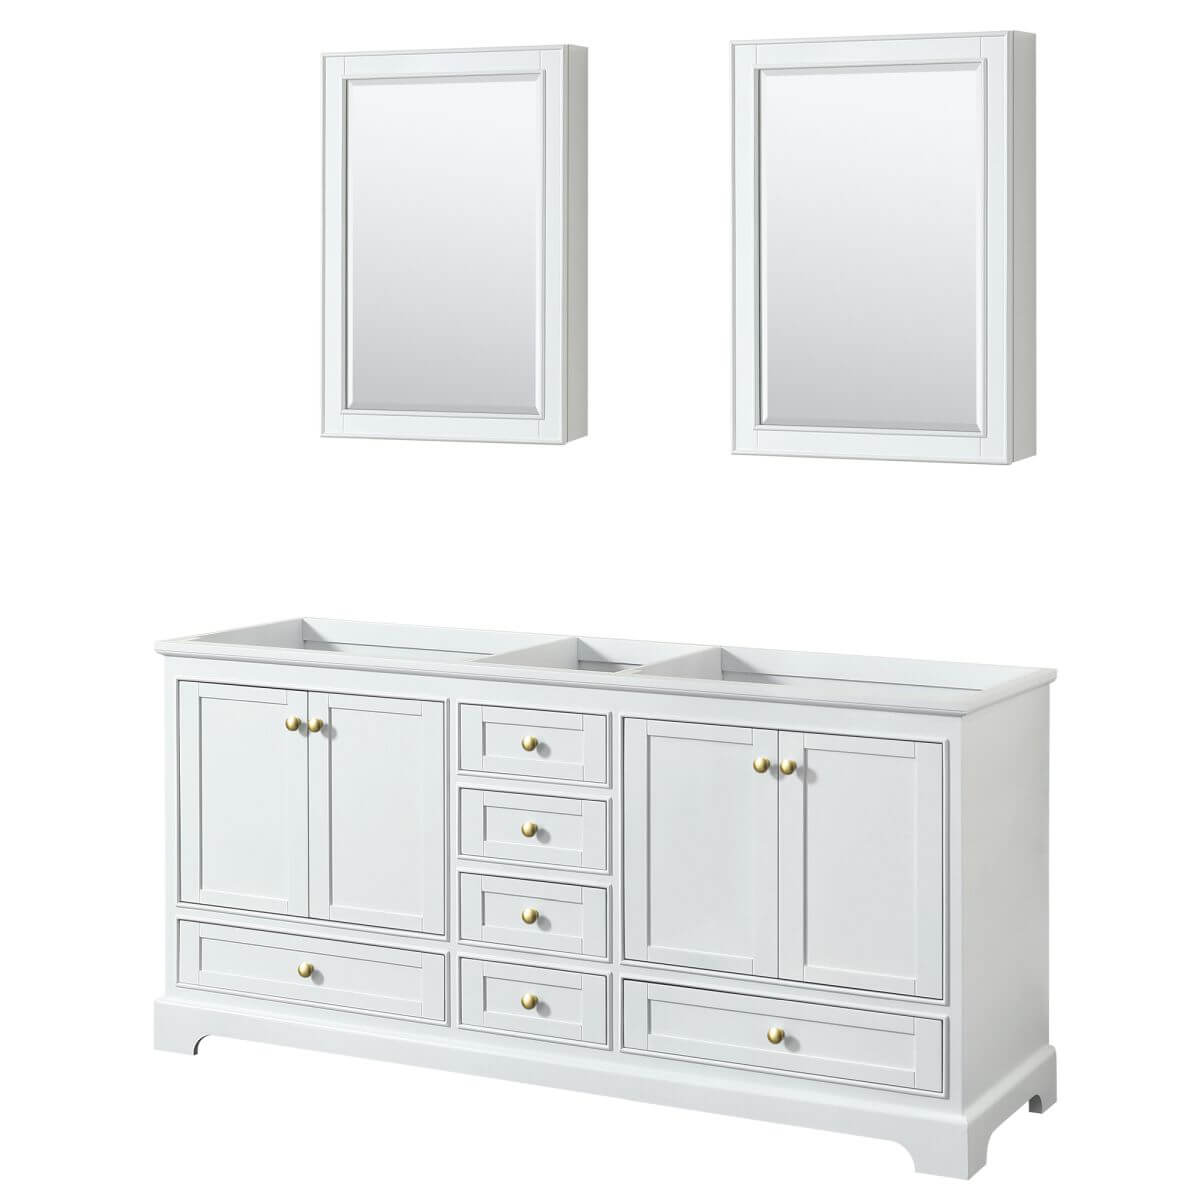 Wyndham Collection Deborah 72 inch Double Bathroom Vanity in White with Medicine Cabinets, Brushed Gold Trim, No Countertop and No Sinks - WCS202072DWGCXSXXMED